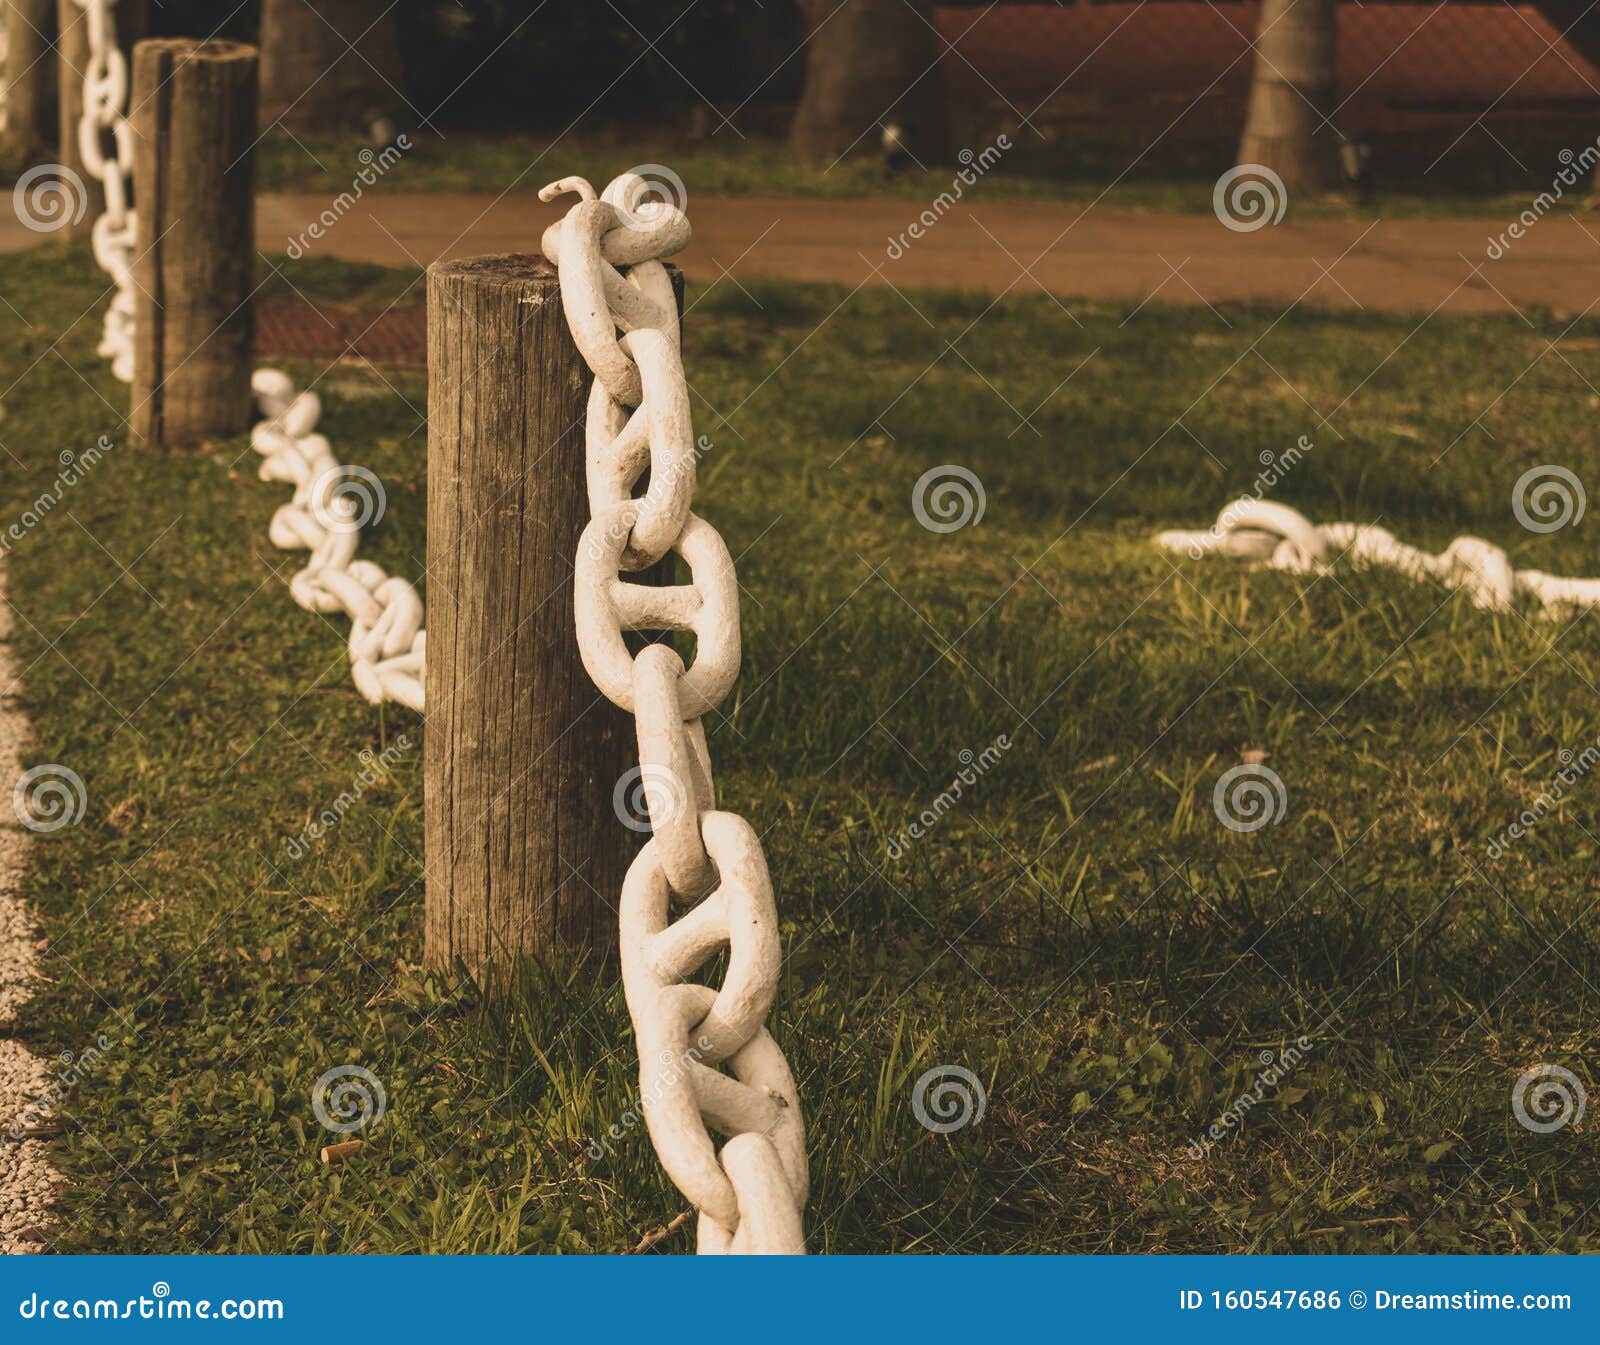 chains and grass  buceo montevideo uruguay